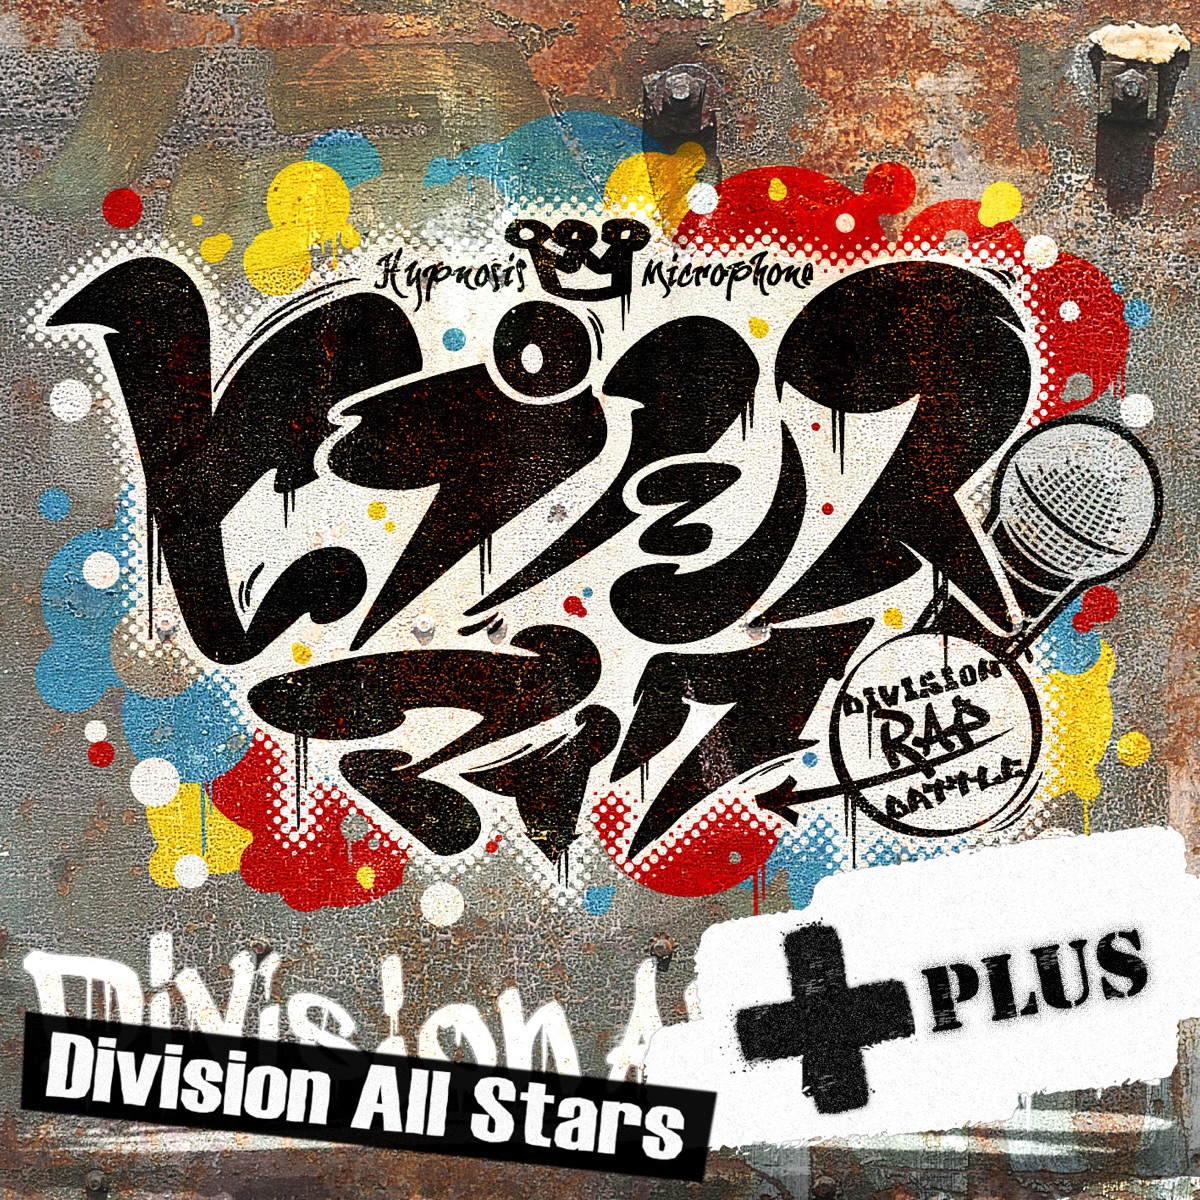 Cover art for『Division All Stars - ヒプノシスマイク -Division Rap Battle- +』from the release『Division All Stars - HypnosisMic Divisoin Rap Battle +